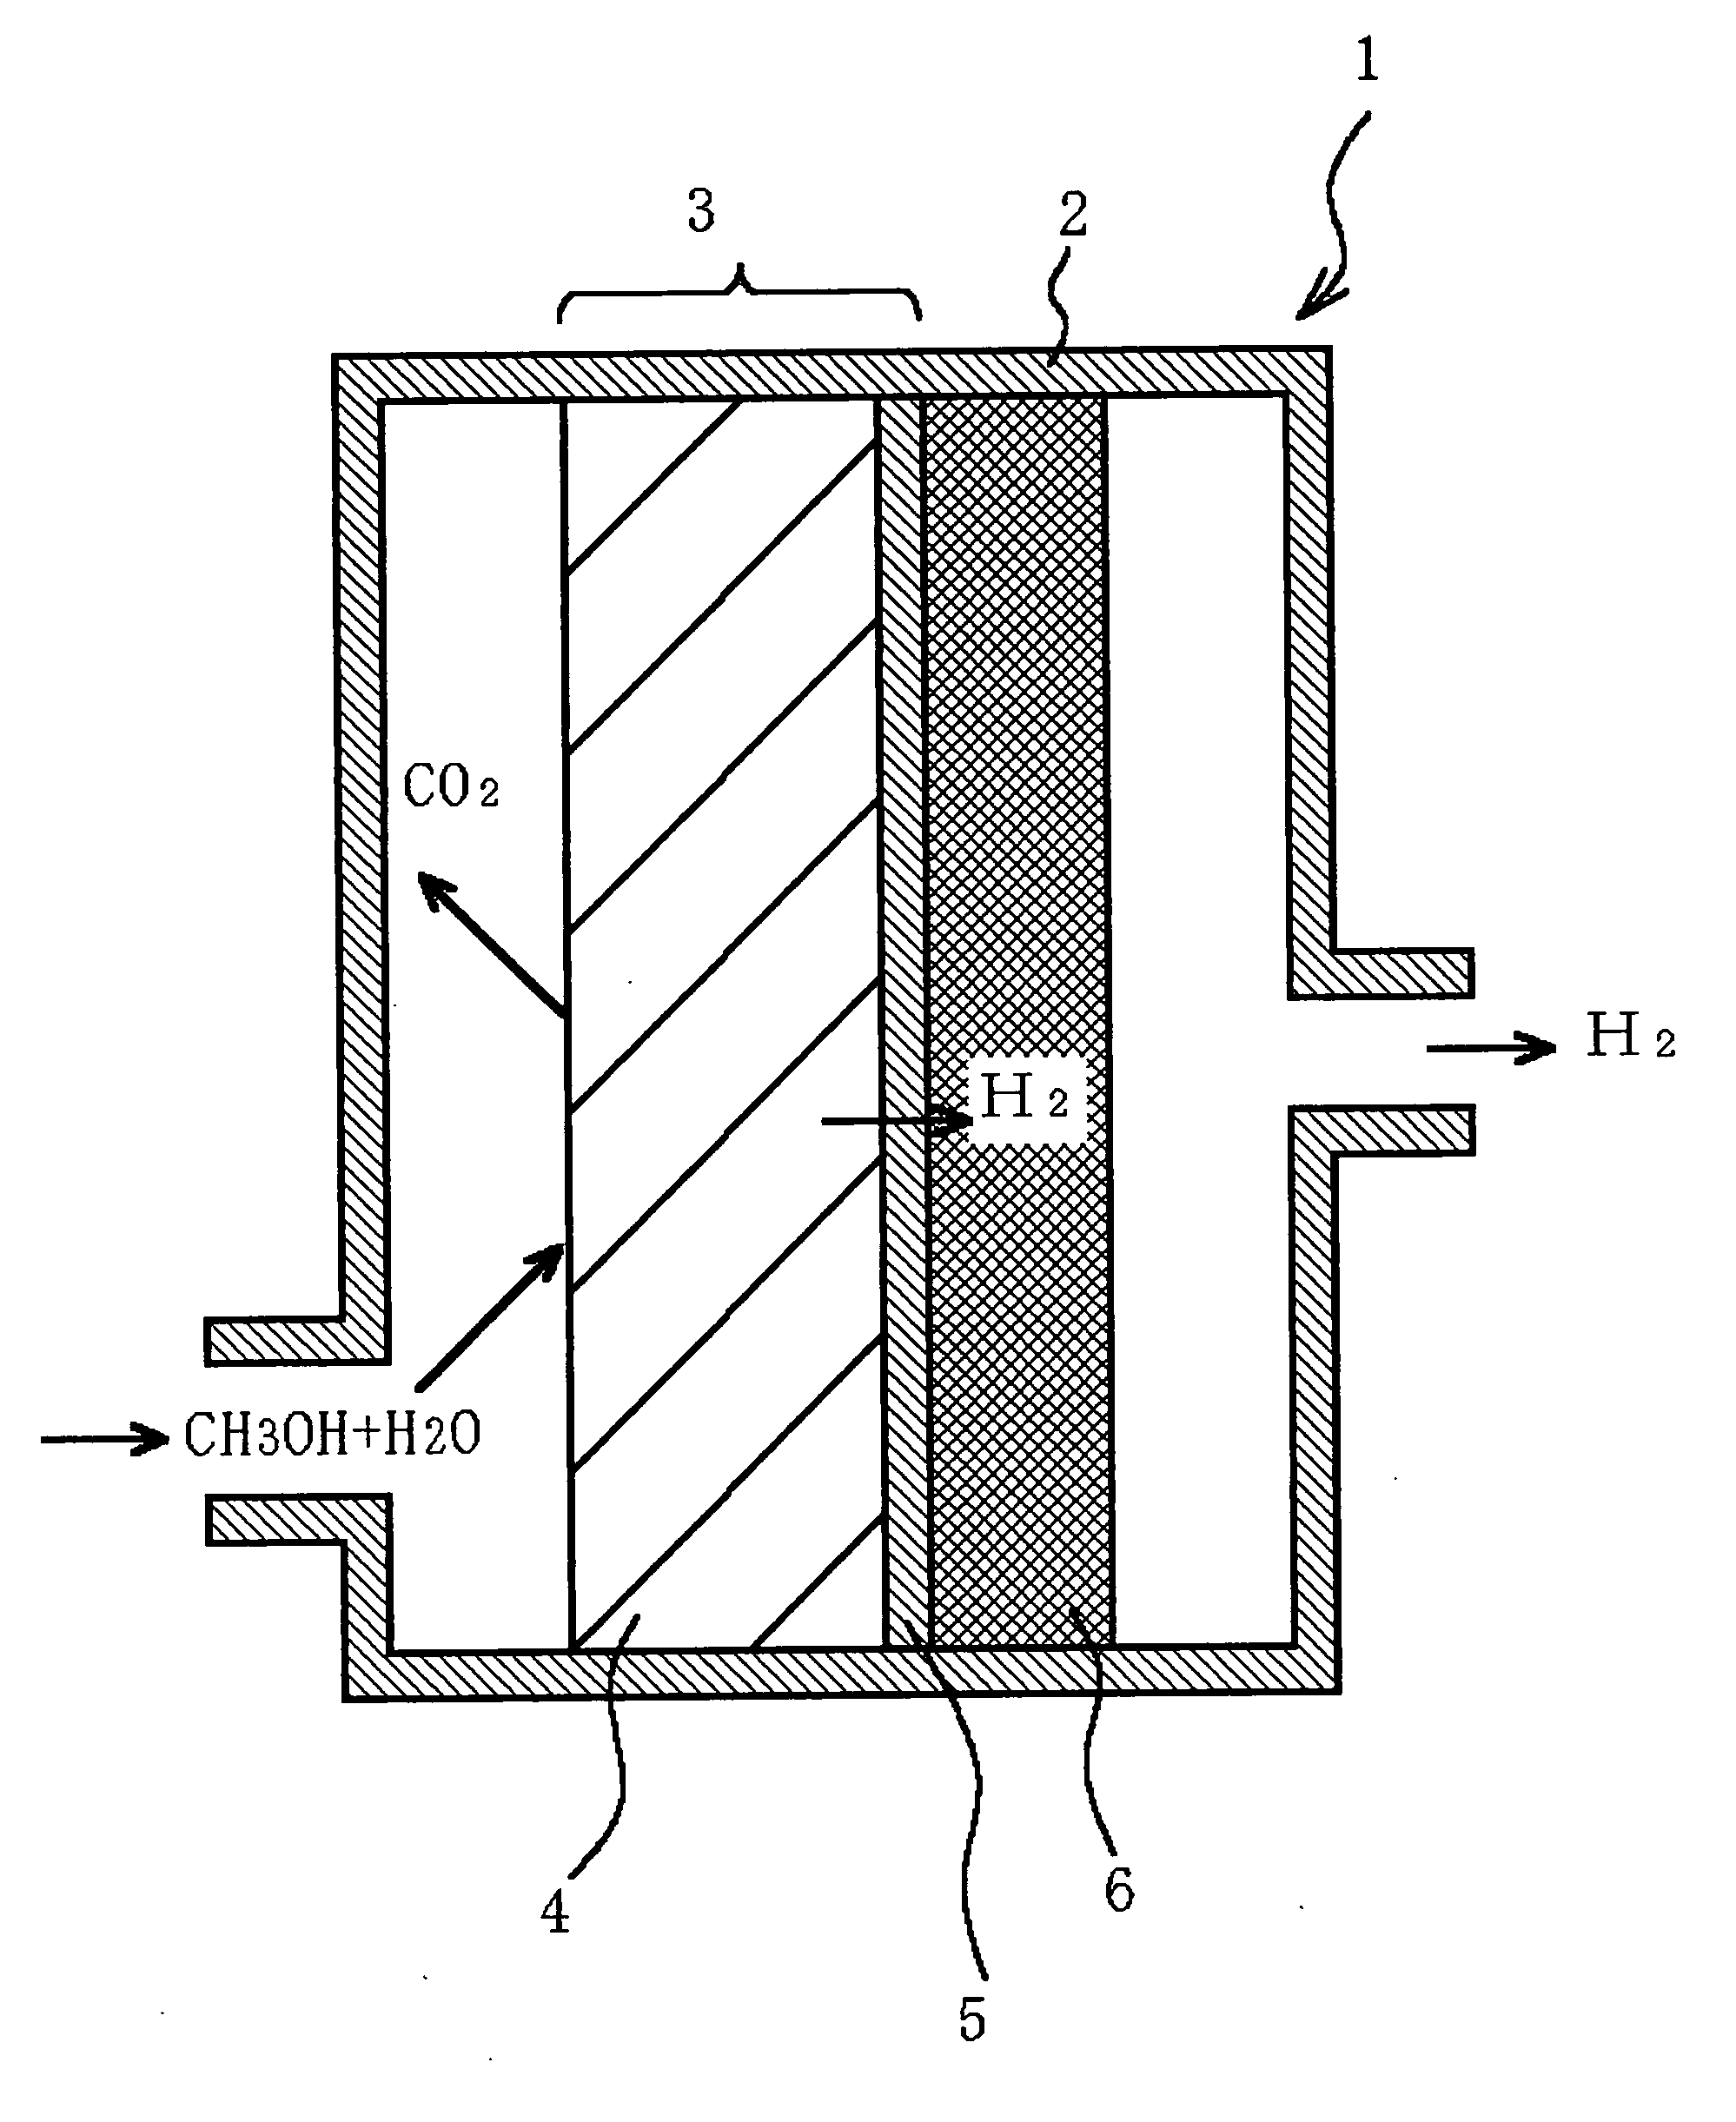 Fuel reformer and method of manufactruing the fuel reformer, electrode for electrochemical device, and electrochemical device